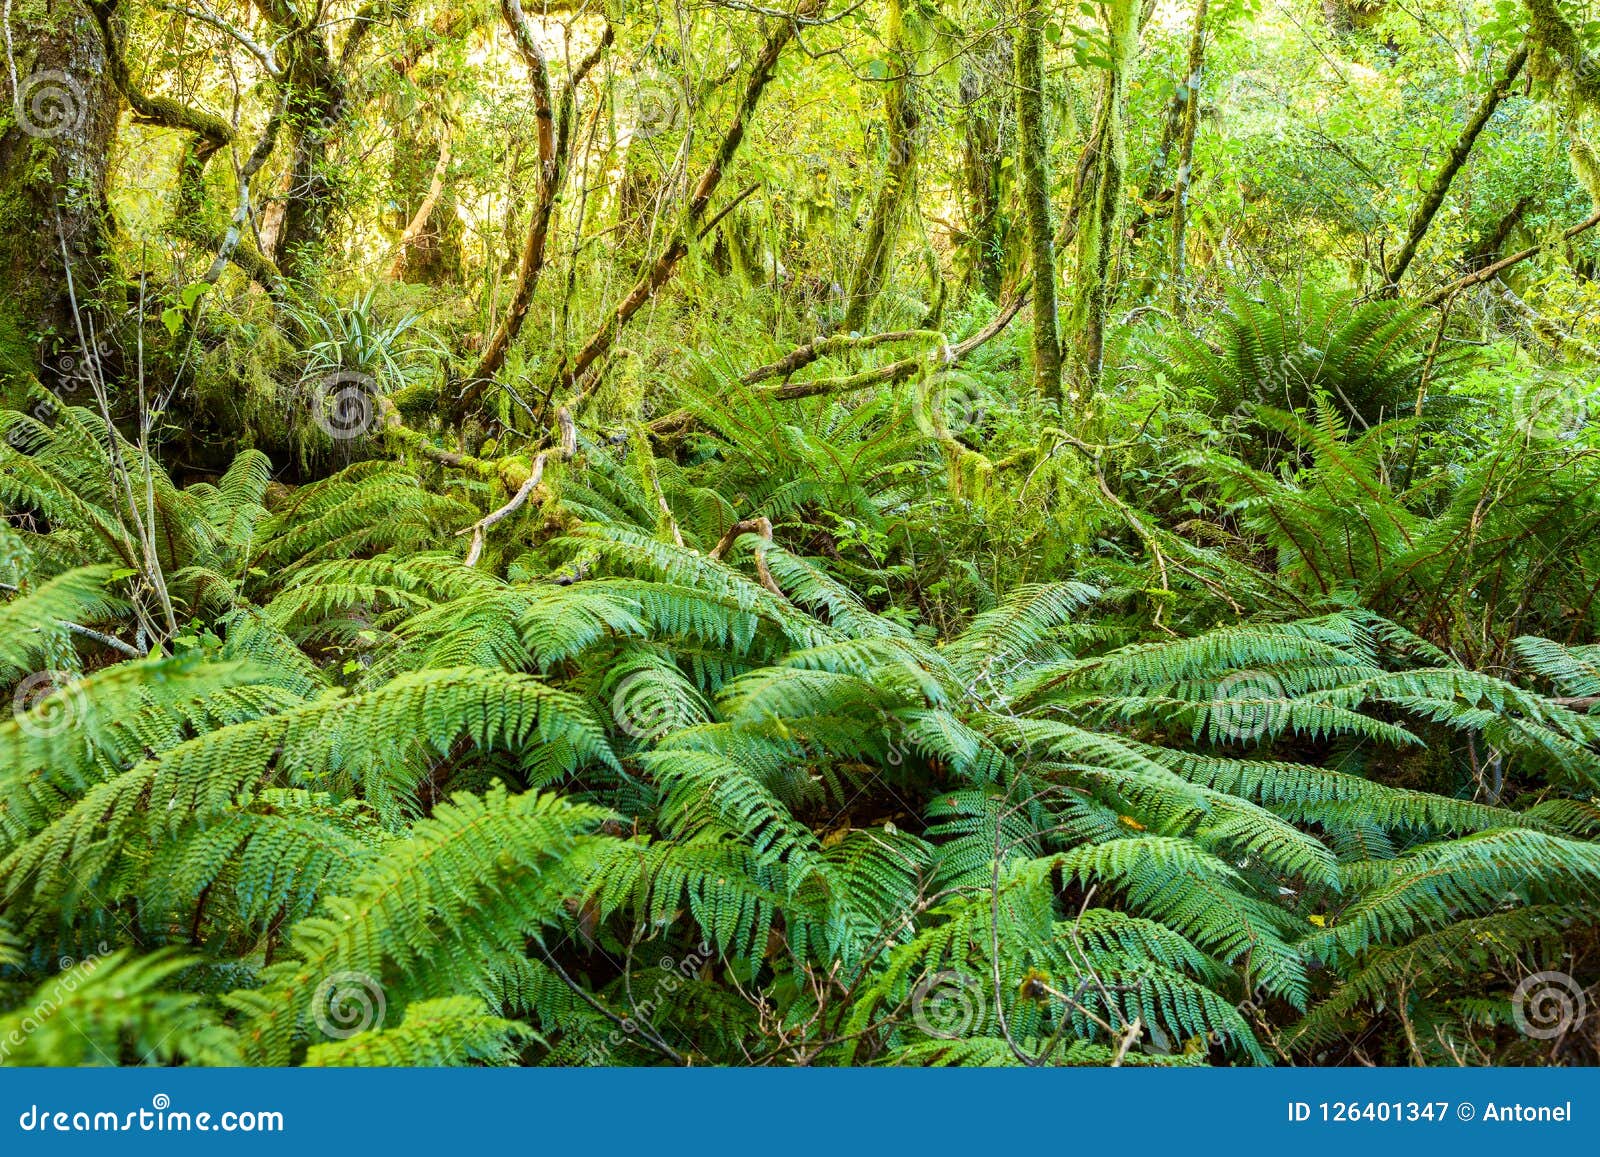 Dense Thicket In The Temperate Rainforest South Island New Zealand